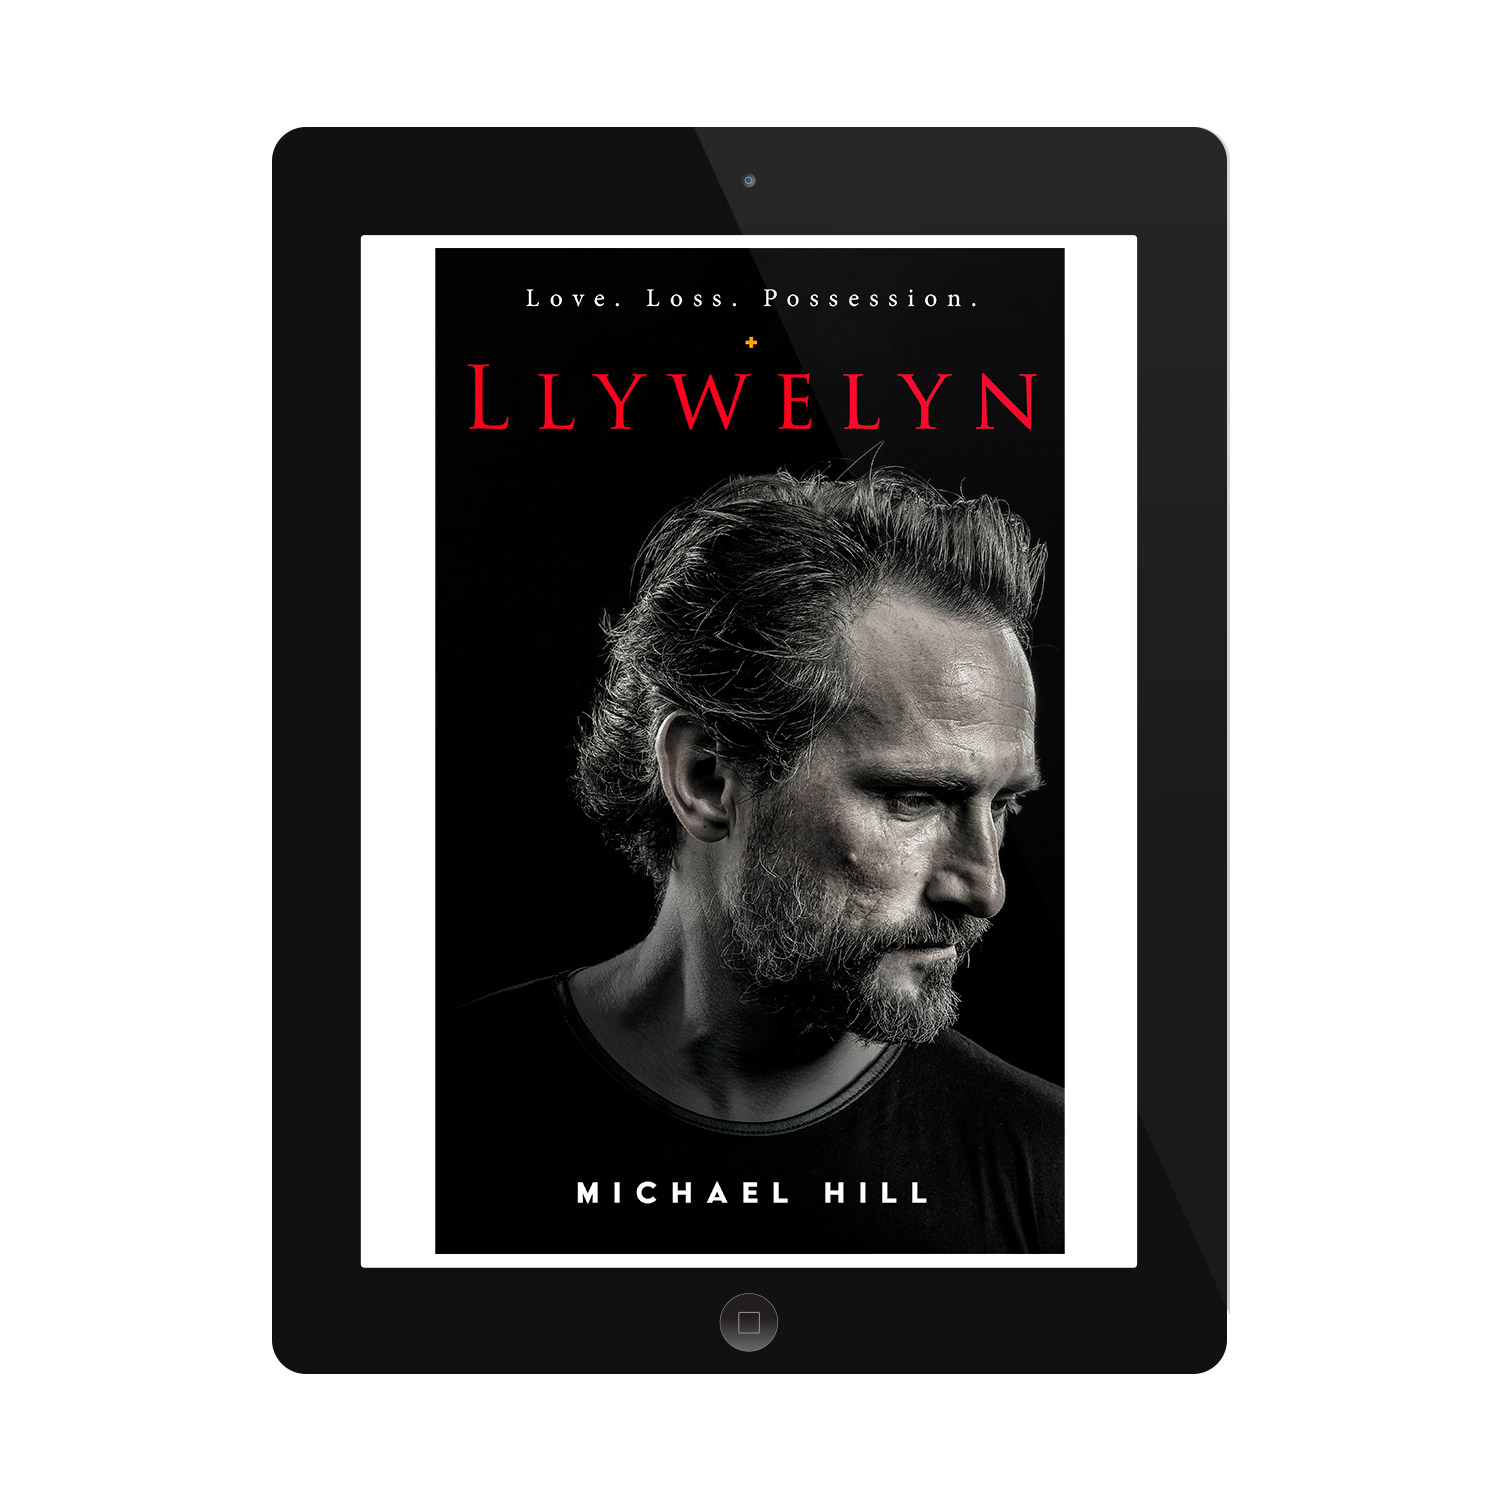 'Llywelyn' is a dark, Welsh interpersonal dramatic novel. The author is Michael Hill. The book cover design is by Mark Thomas. To learn more about what Mark could do for your book, please visit coverness.com.